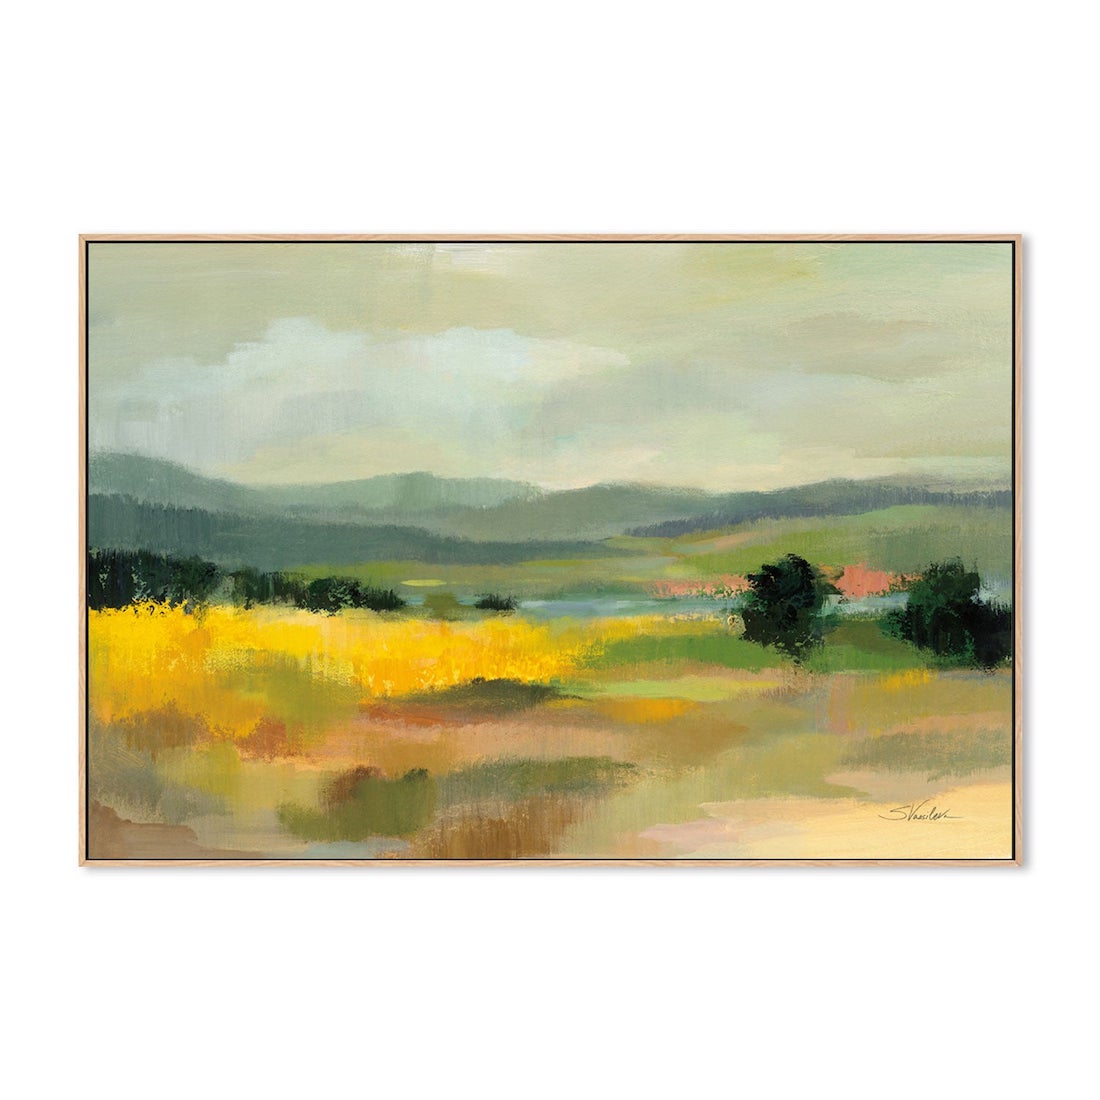 Gioia best place to buy artwork online has many abstract landscape paintings